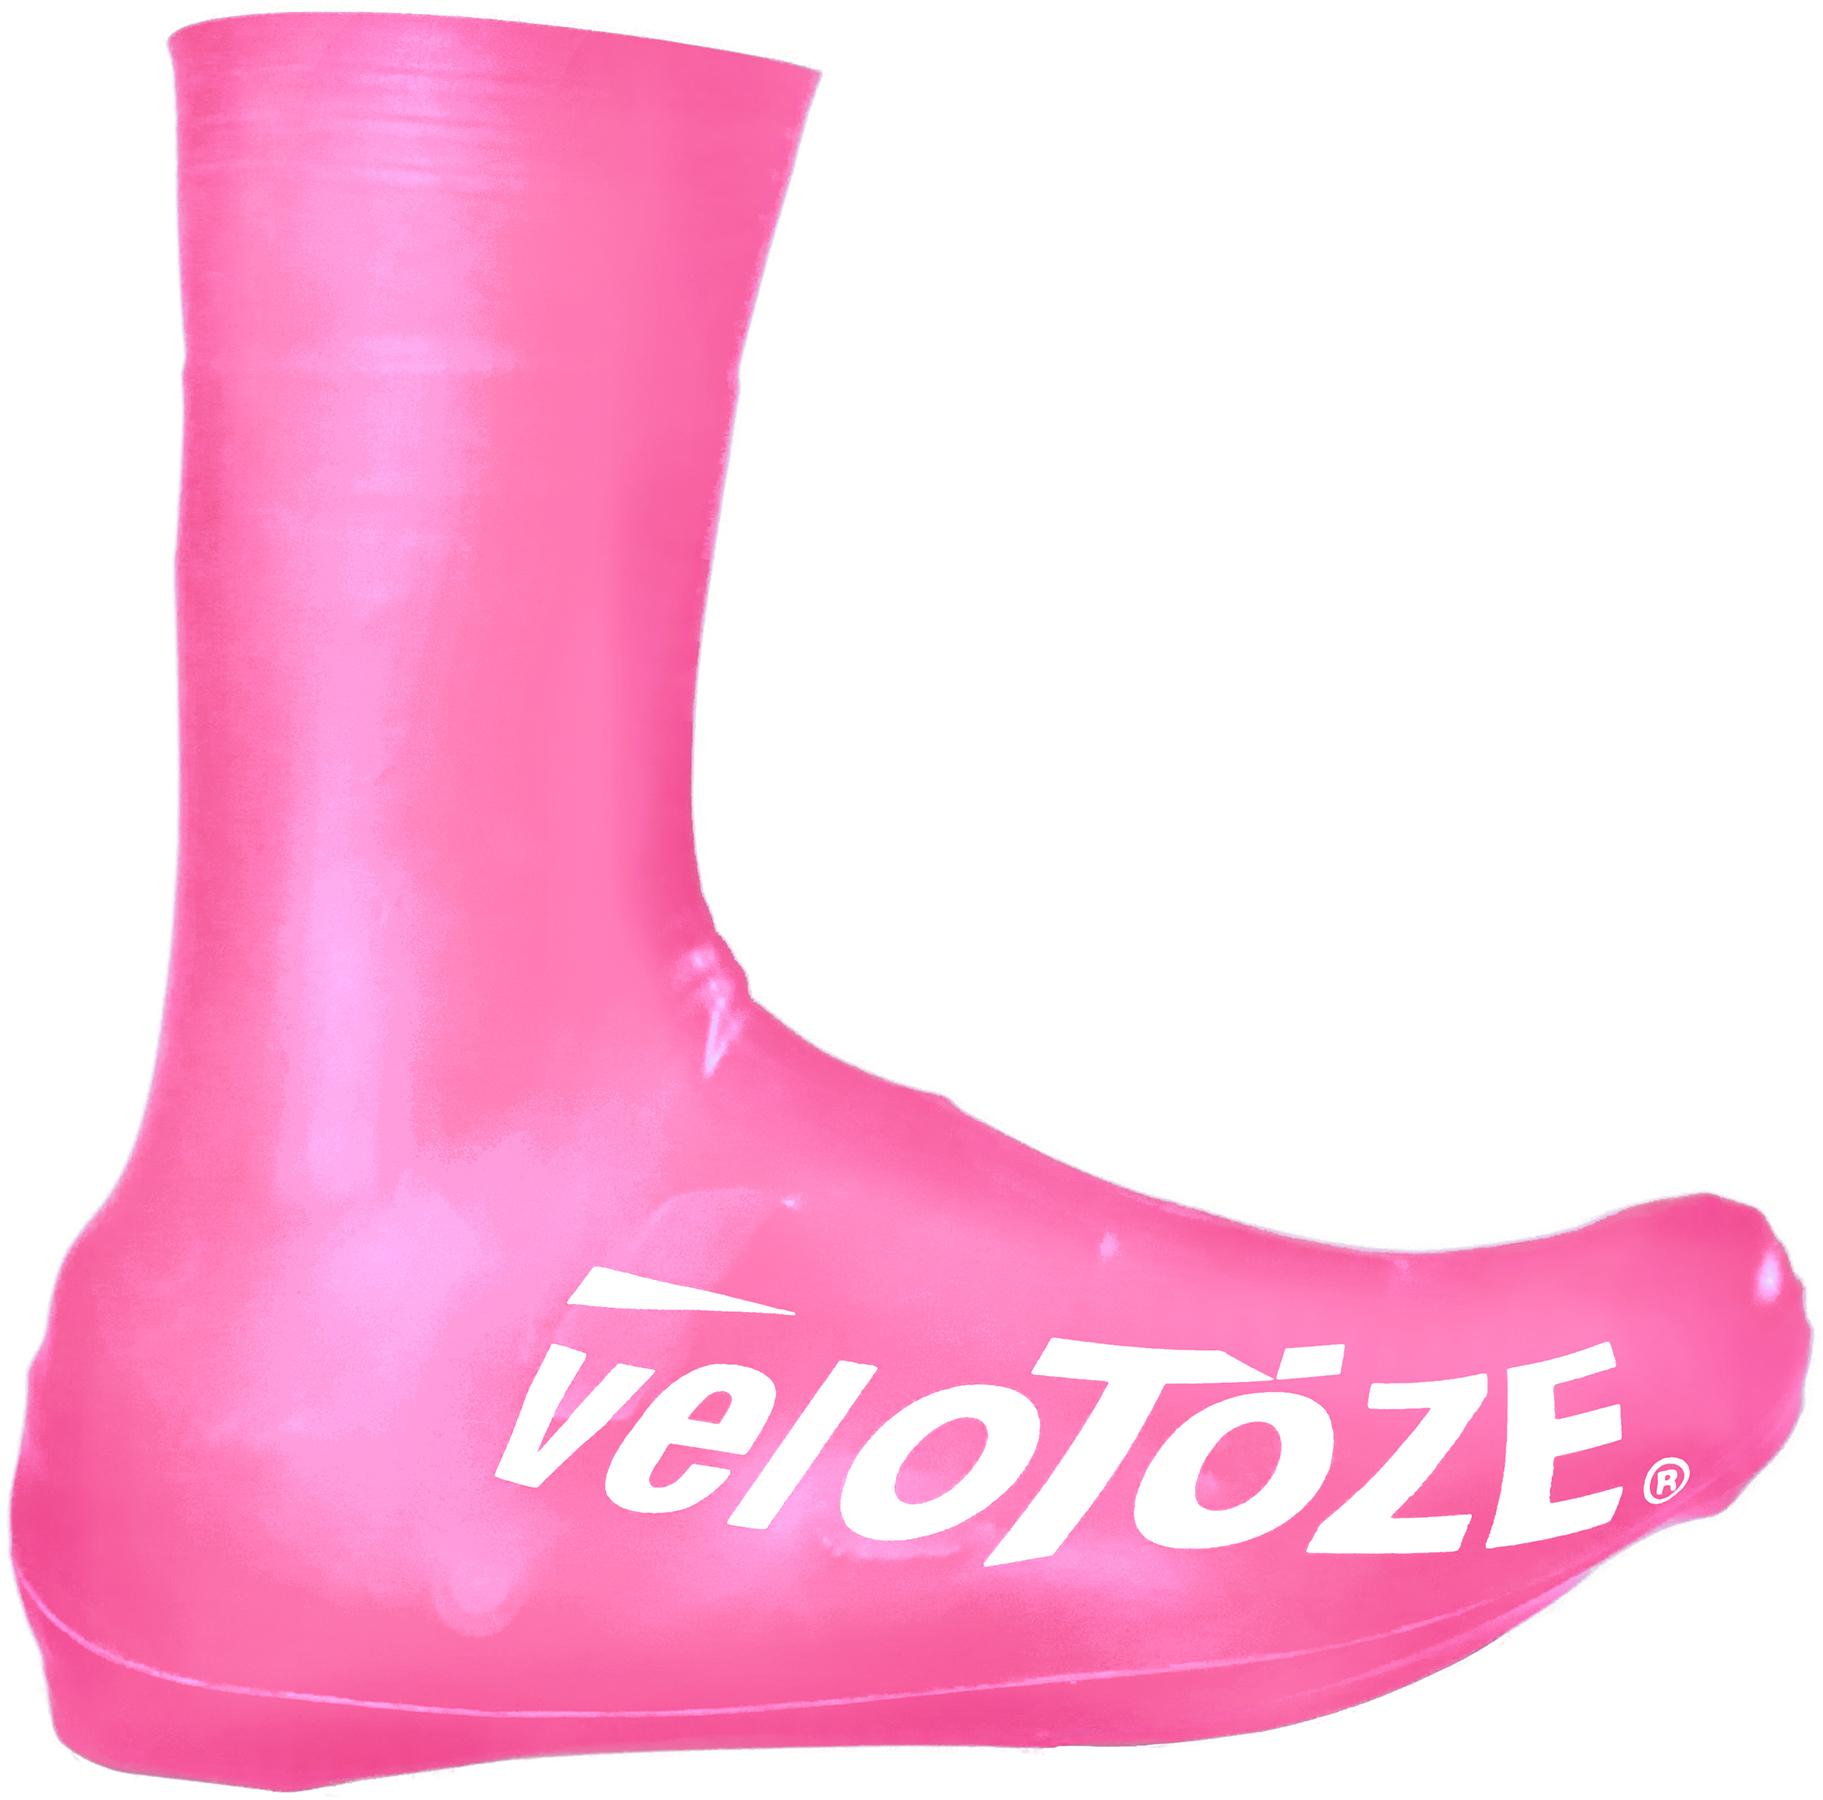 Velotoze Tall Shoe Covers 2.0 - Pink